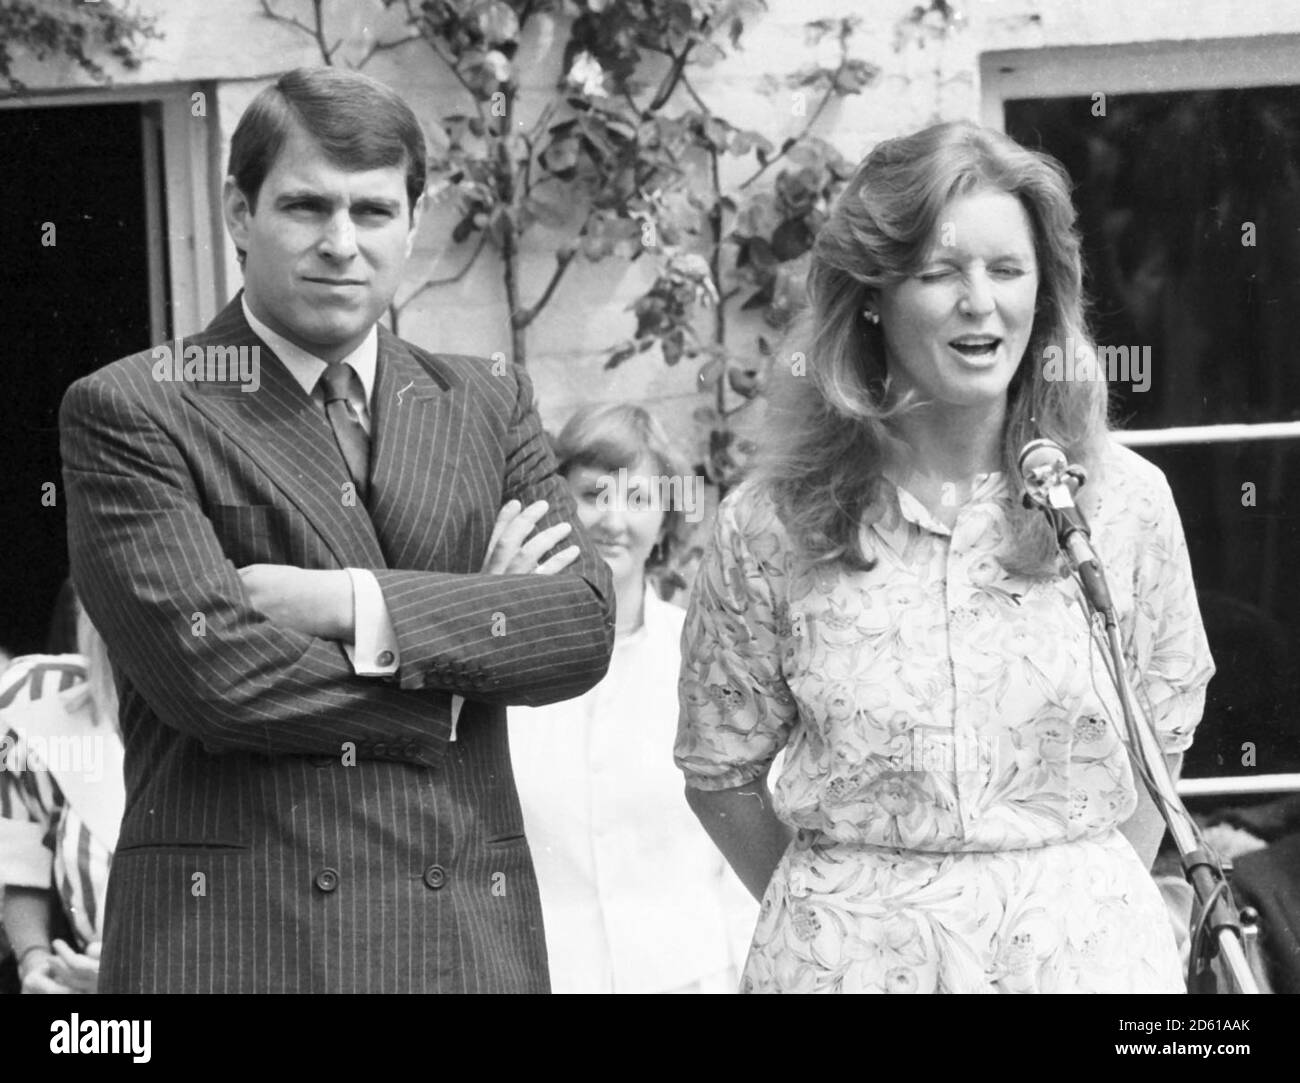 PRINCE ANDREW AND SARAH FERGUSON PARTY AT DUMMER 1983 Stock Photo